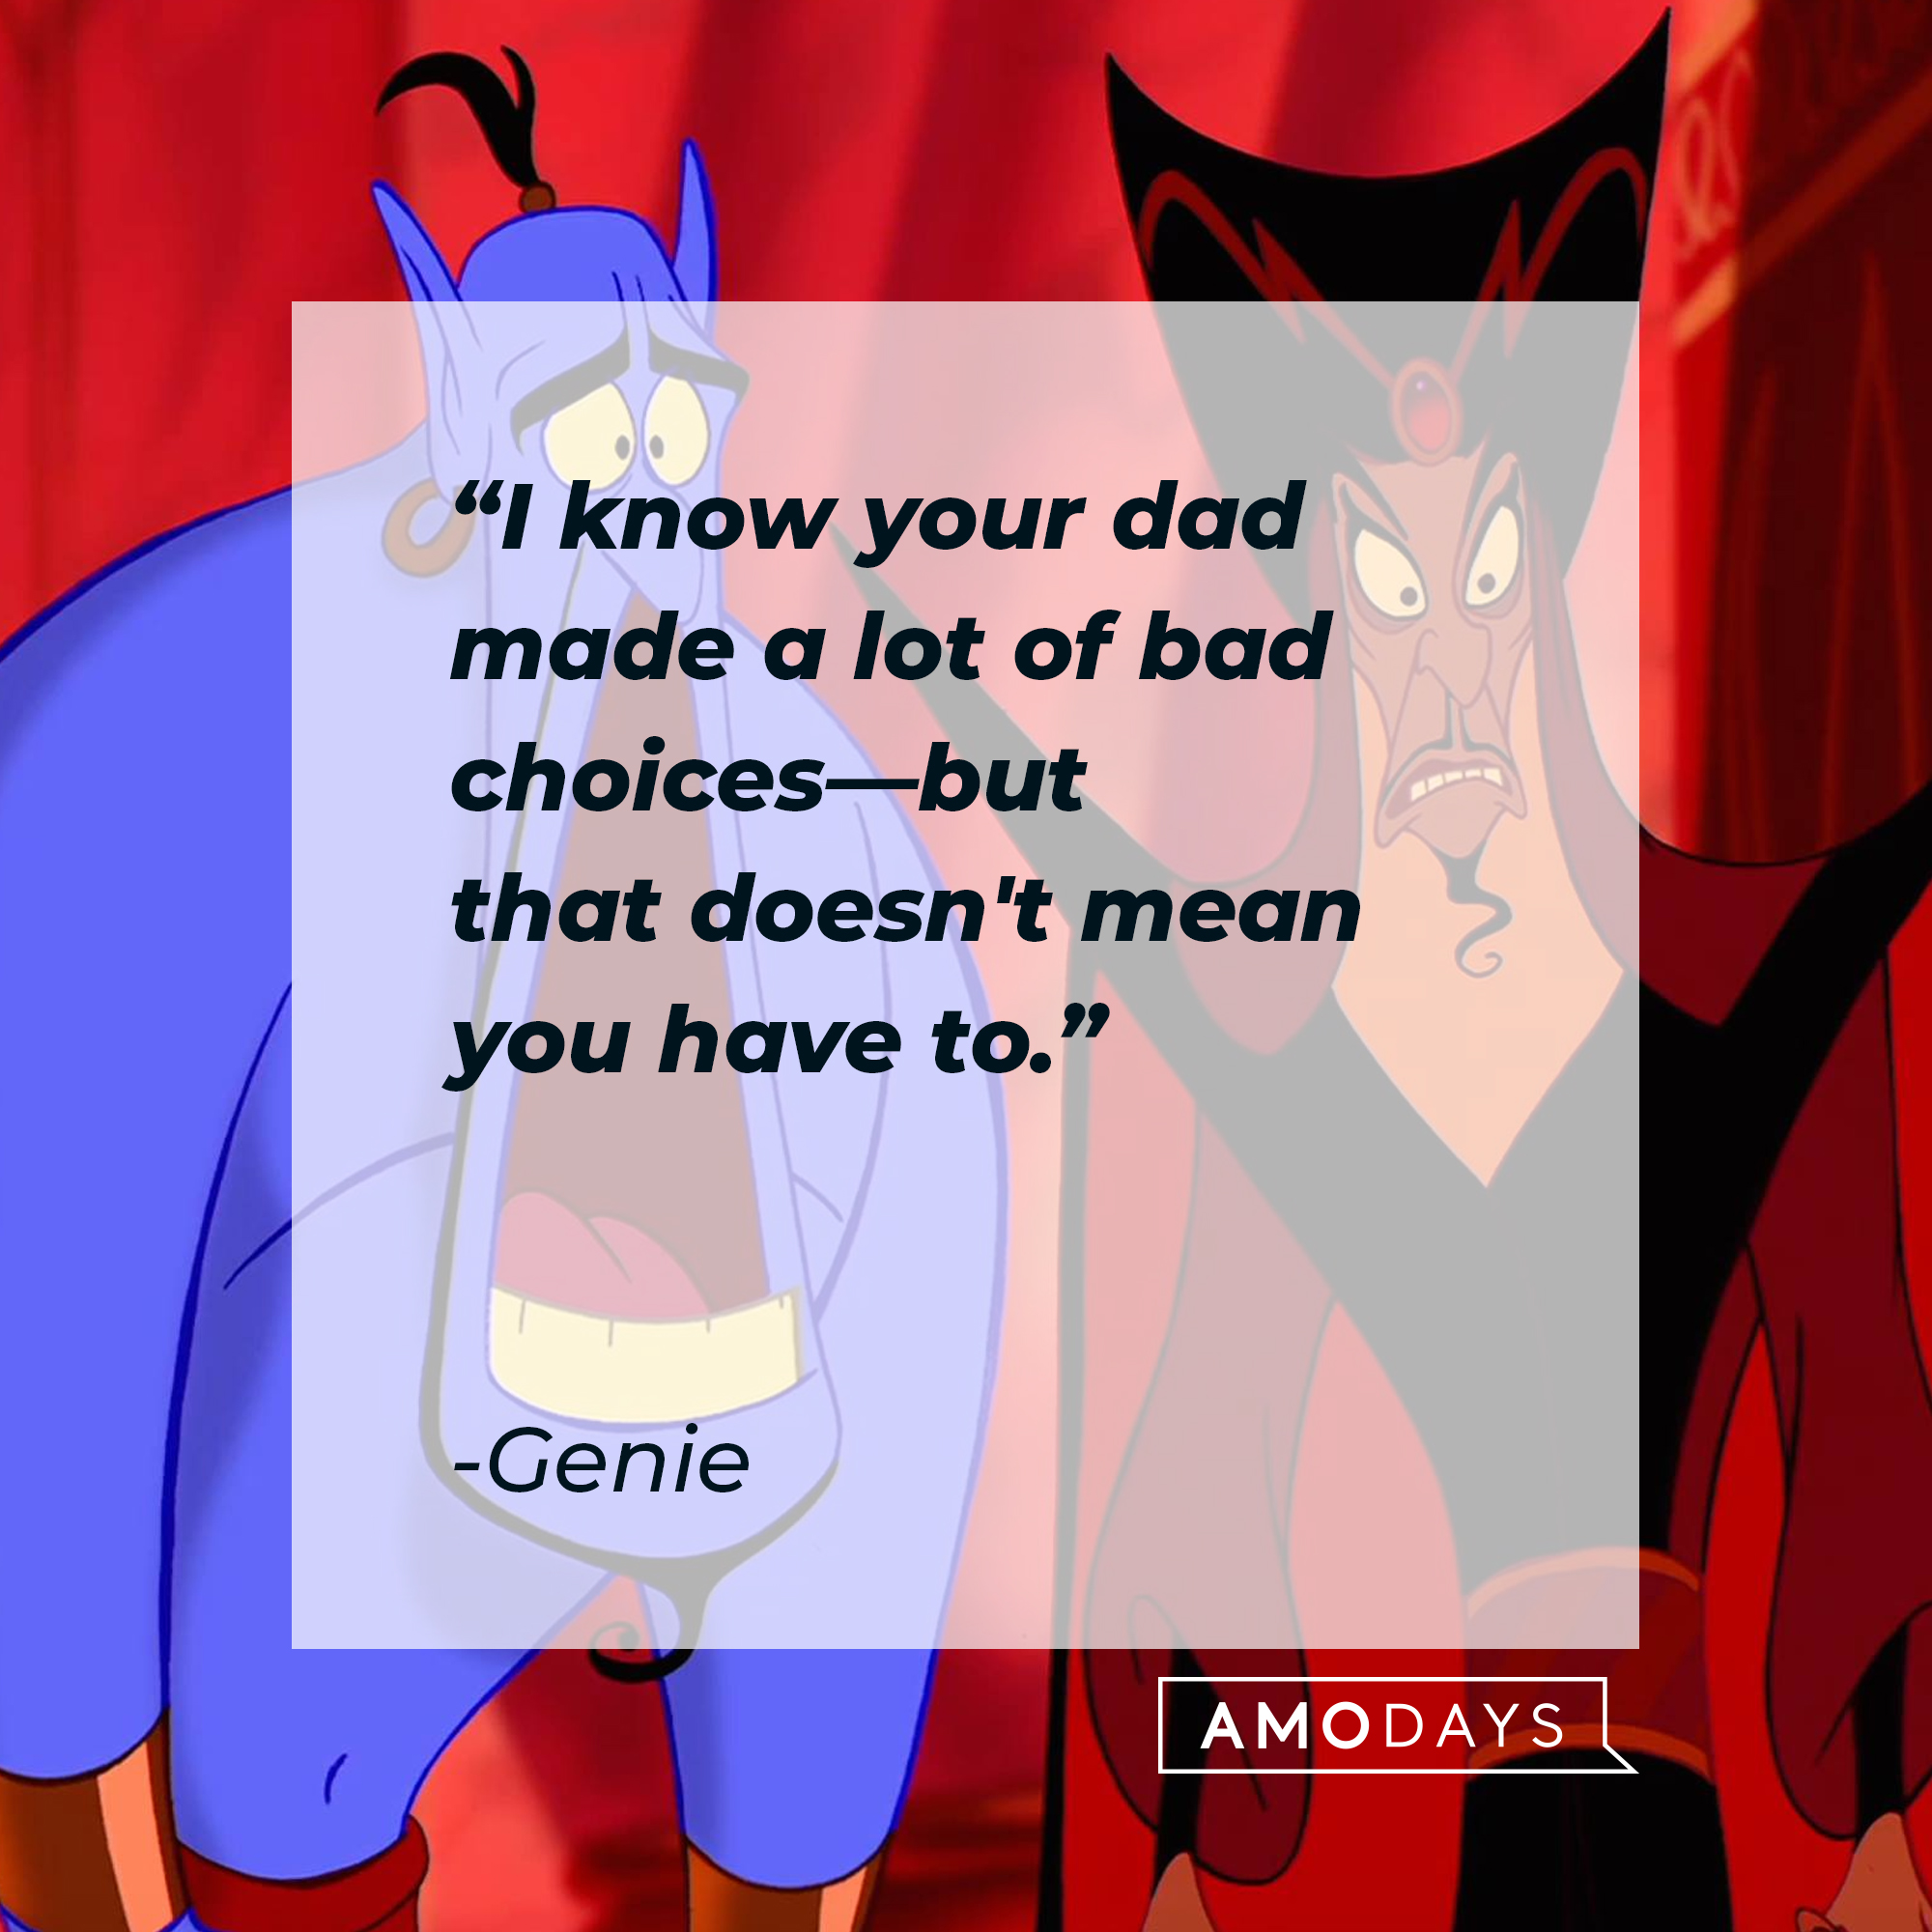 The animated Genie with his quote: "I know your dad made a lot of bad choices, but that doesn't mean you have to." | Source: Facebook.com/DisneyAladdin